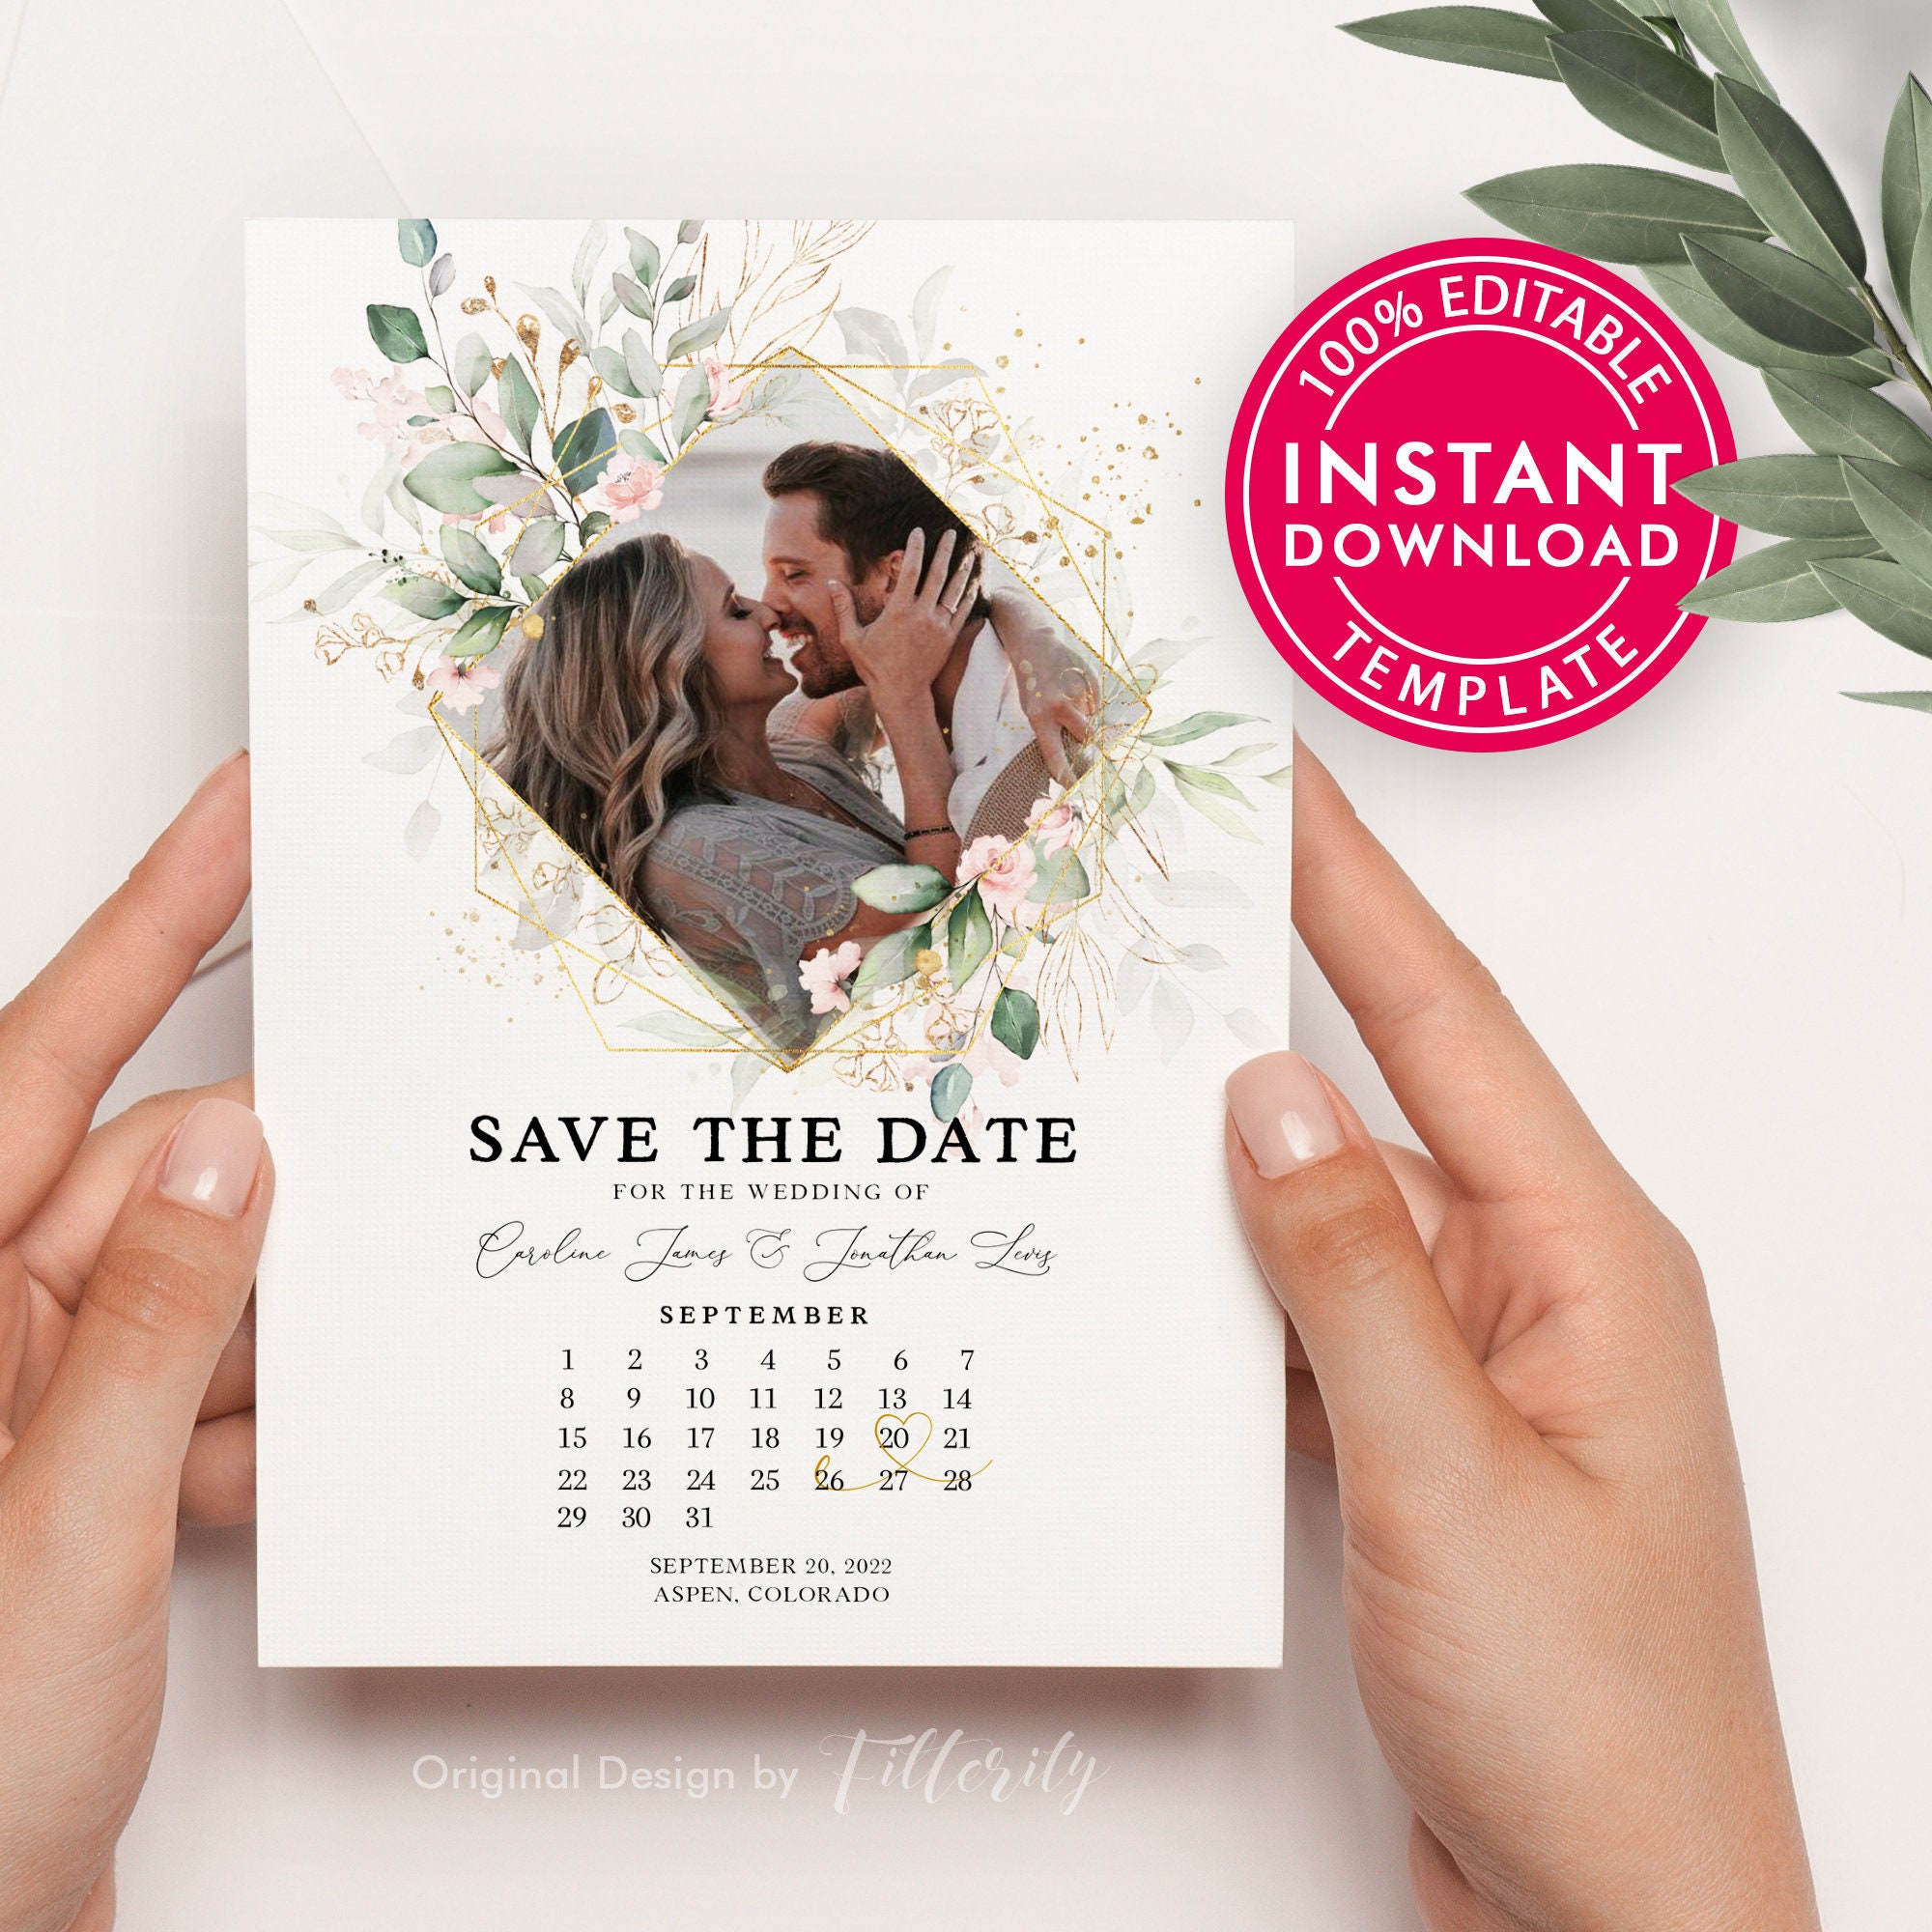 Custom Full Color Save The Date Magnets With Envelopes 5 12 x 4 14 Simply  Scripted Box Of 25 Cards - Office Depot